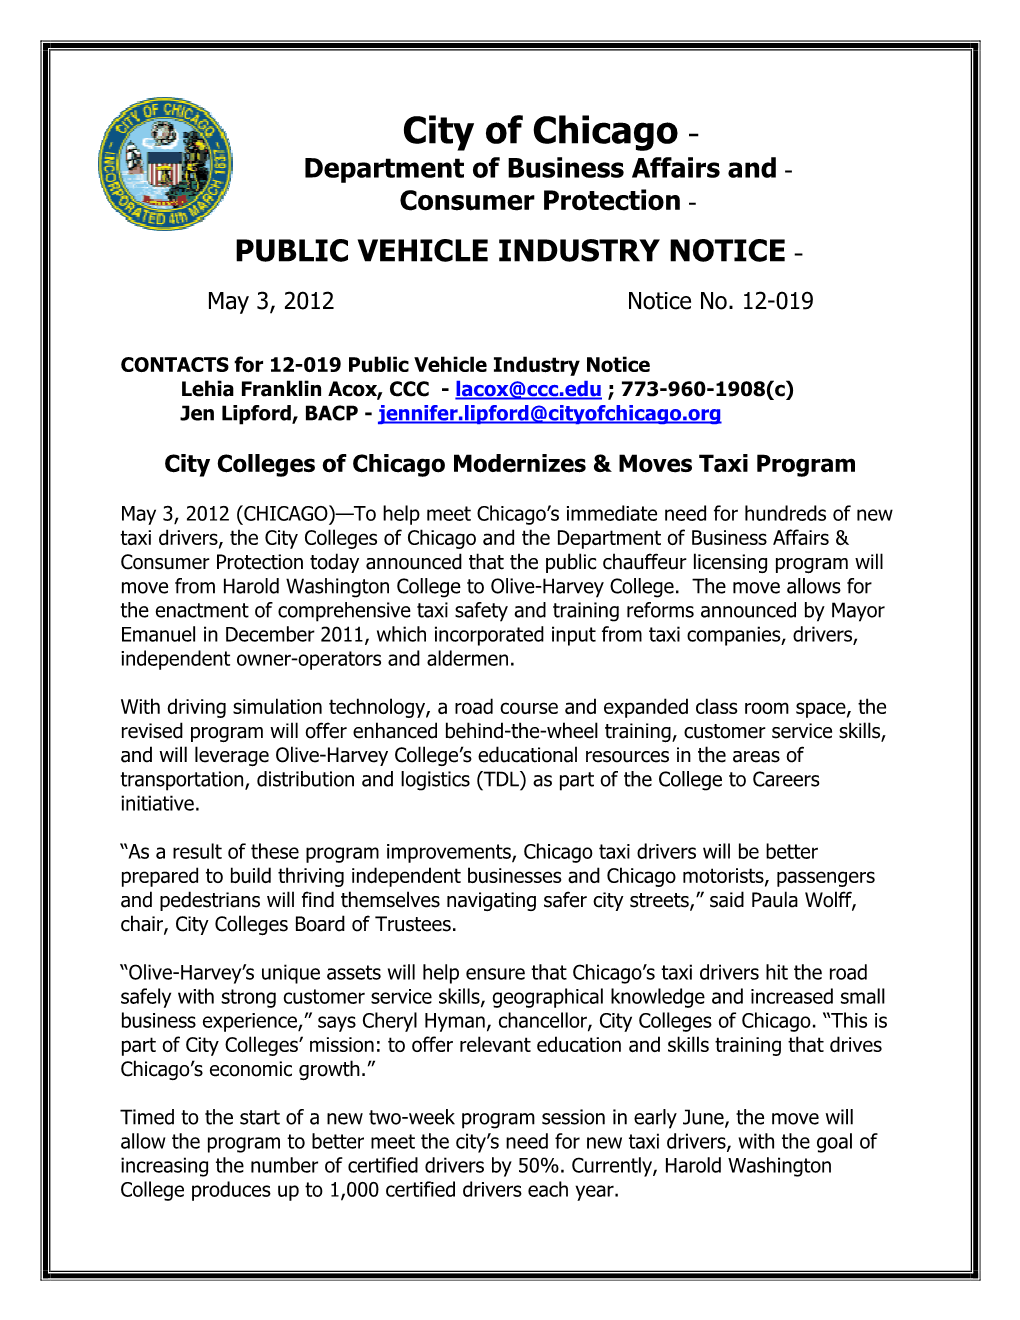 City Colleges of Chicago Modernizes & Moves Taxi